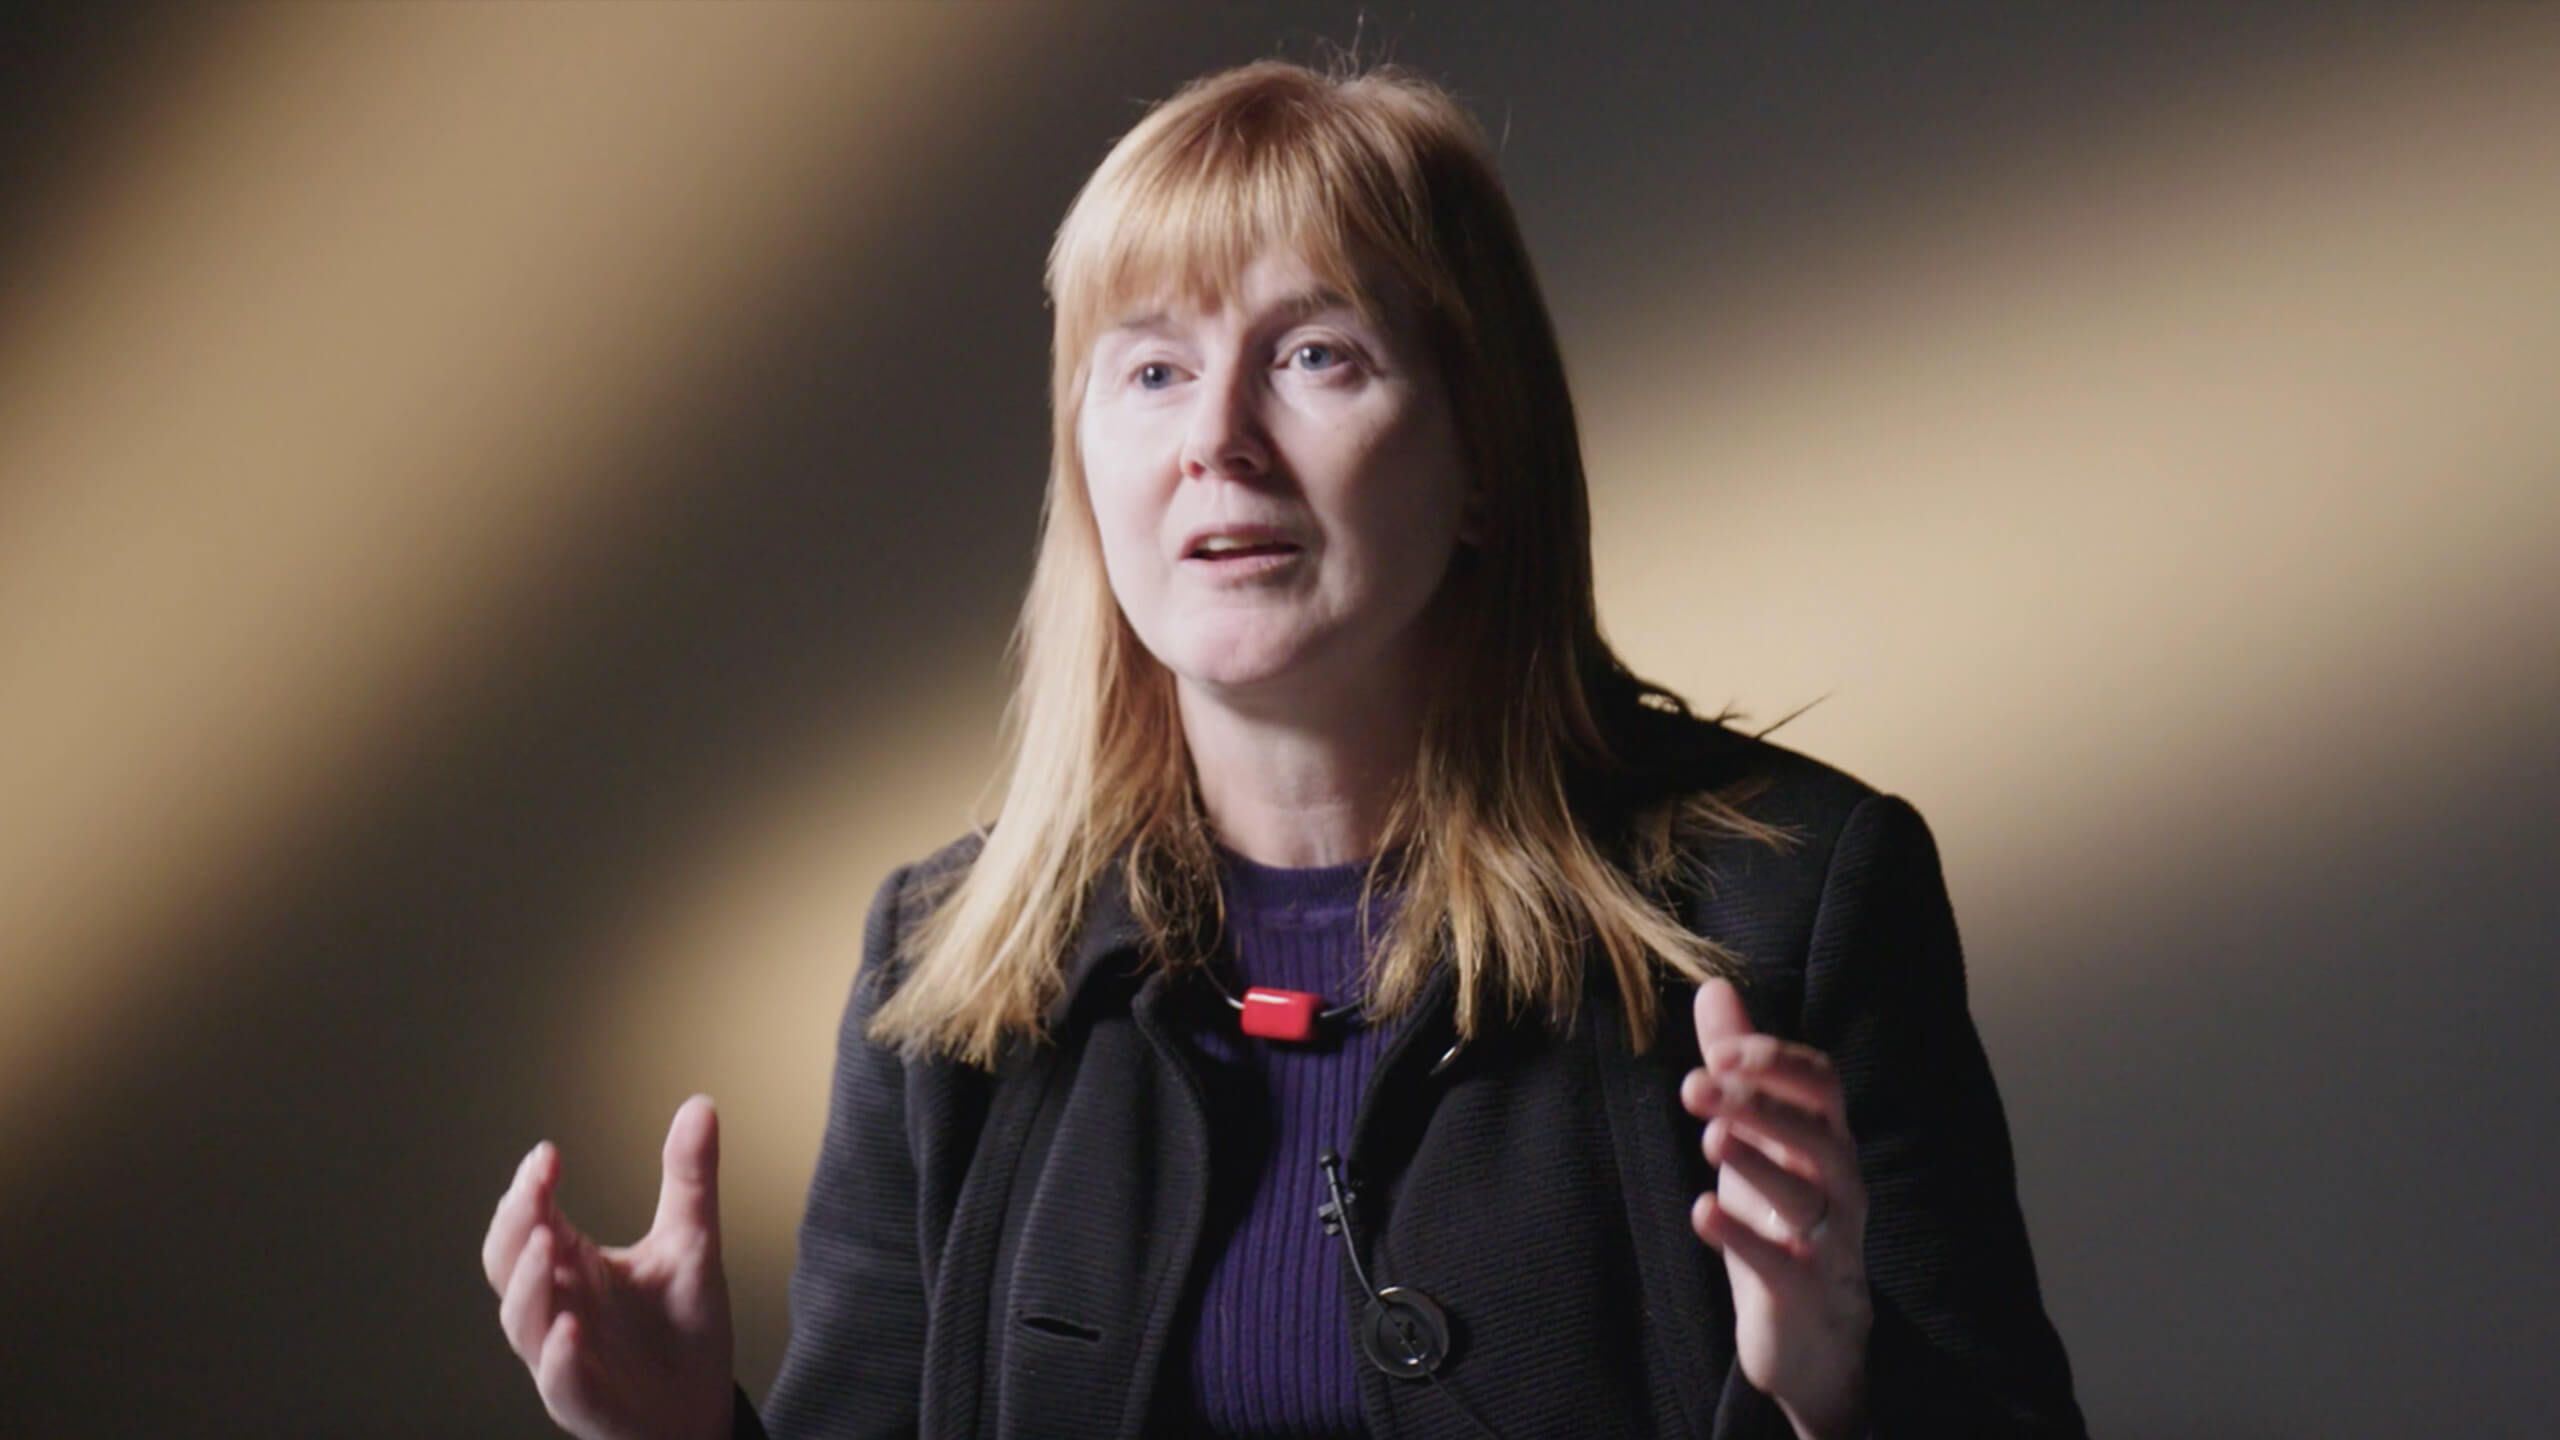 Rachel Flowers of Croydon Council in the the Director of Public Health Report video, from the Rise Media case studies archive